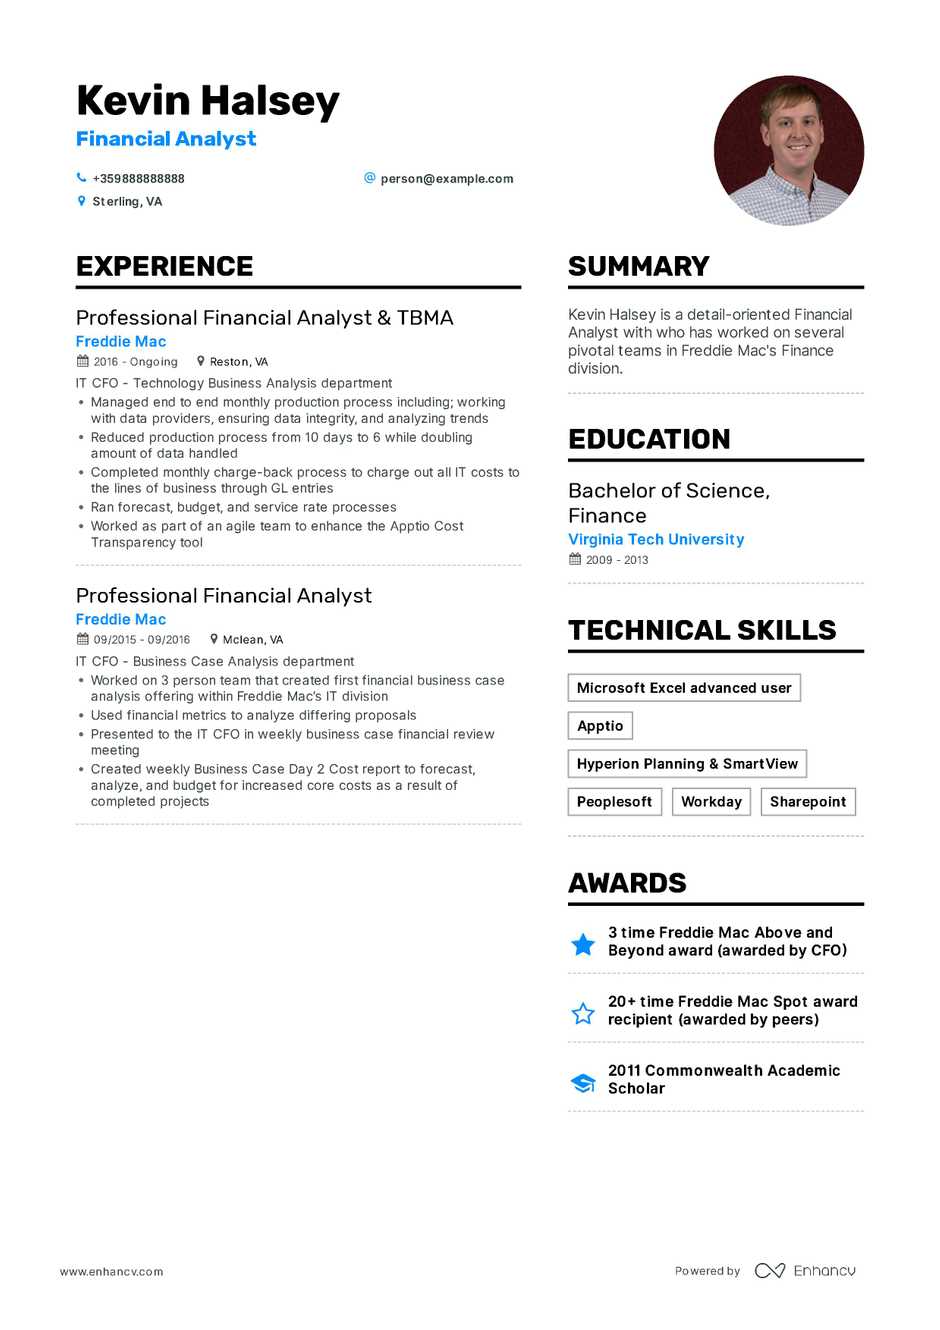 financial analyst resume example and guide for 2019